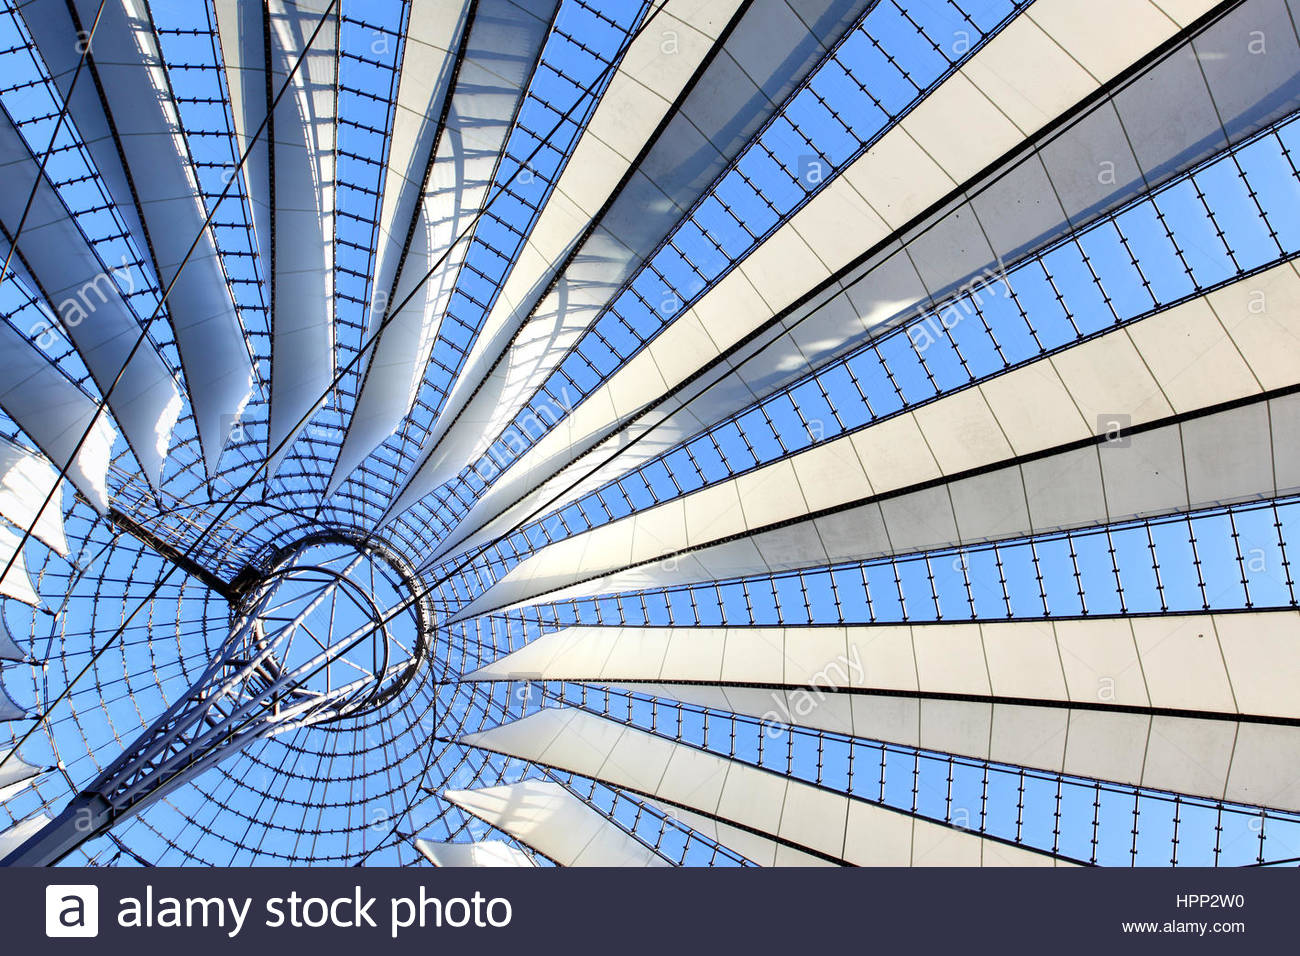 Roof construction   abstract architectural background Stock Photo